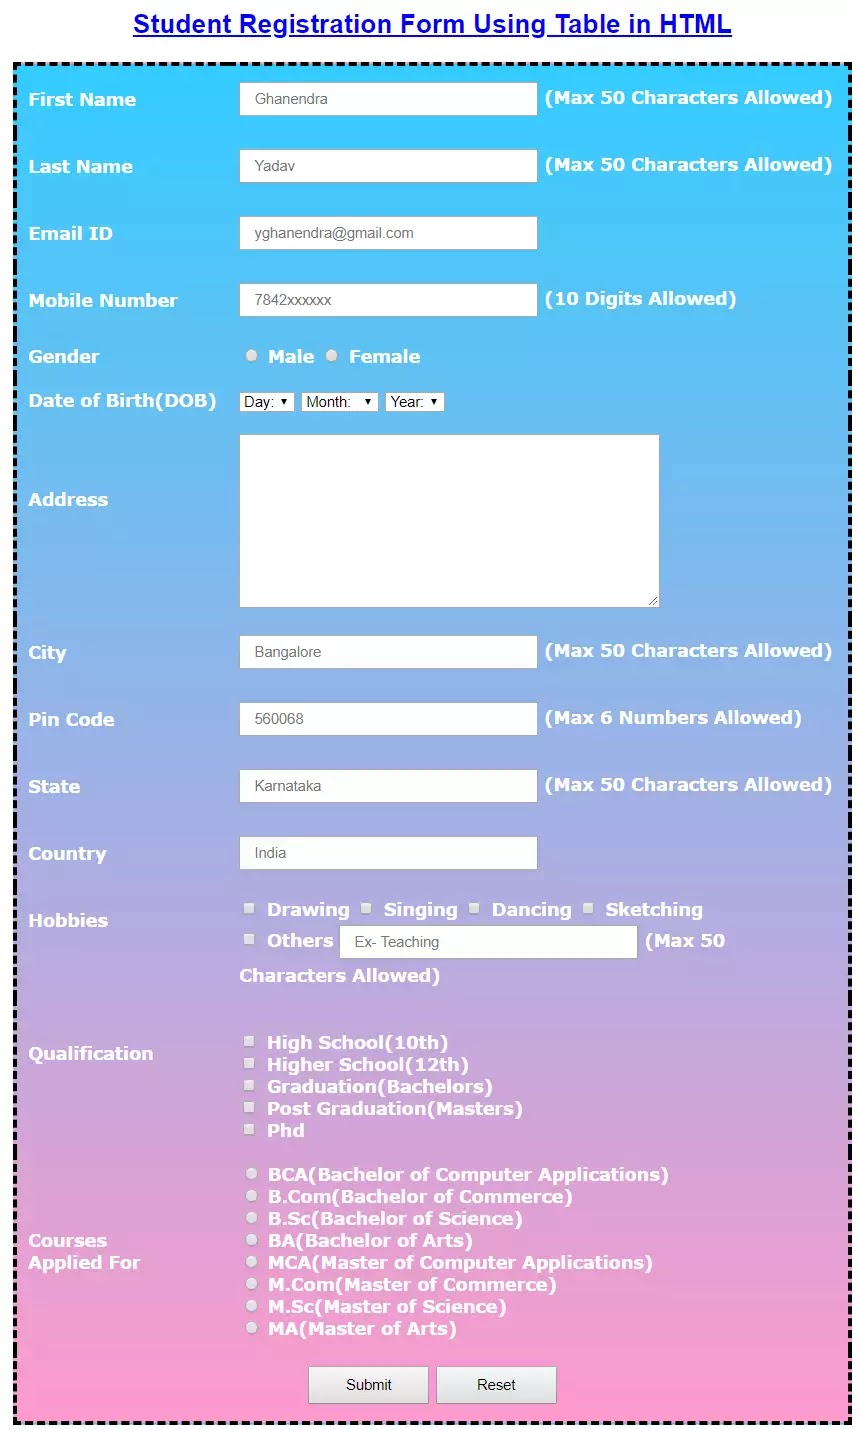 Student Registration Form in HTML with CSS | Completely Free